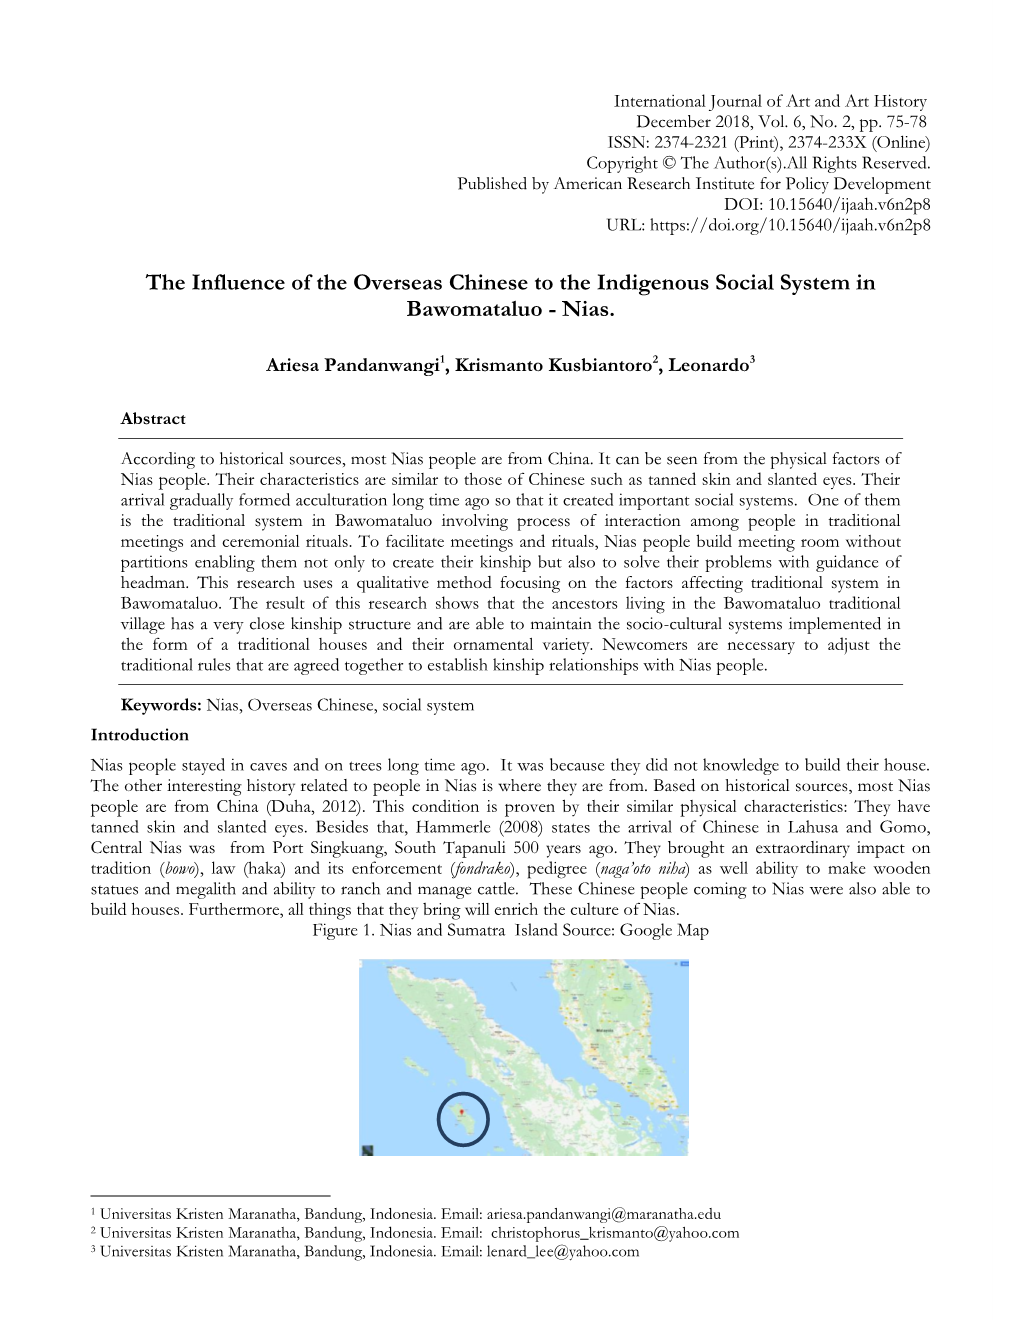 The Influence of the Overseas Chinese to the Indigenous Social System in Bawomataluo - Nias